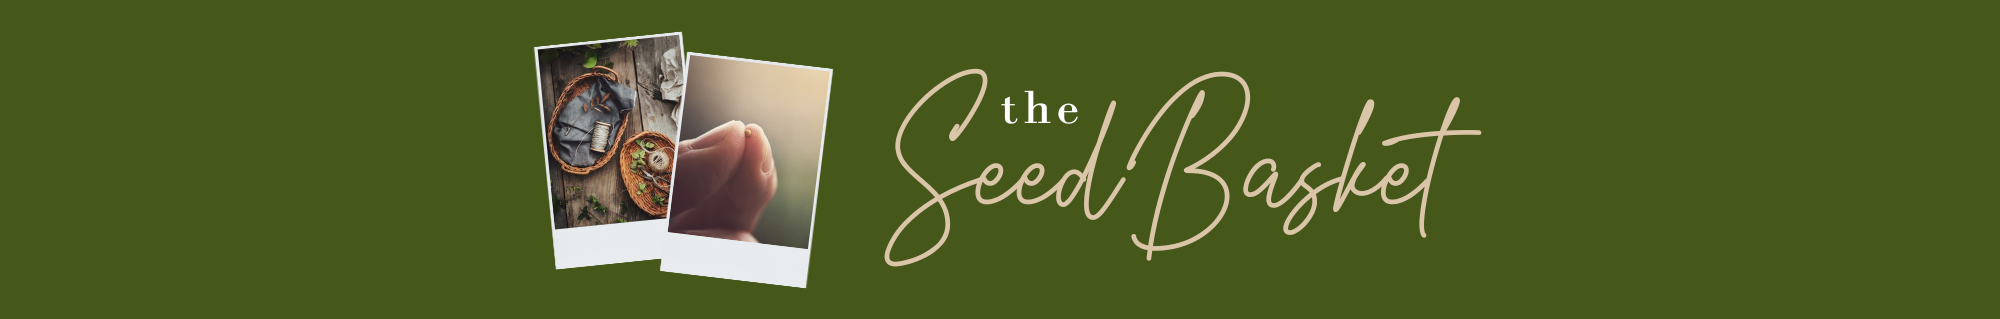 Getting the Seed out of the basket and into hungry hearts. Matthew 13